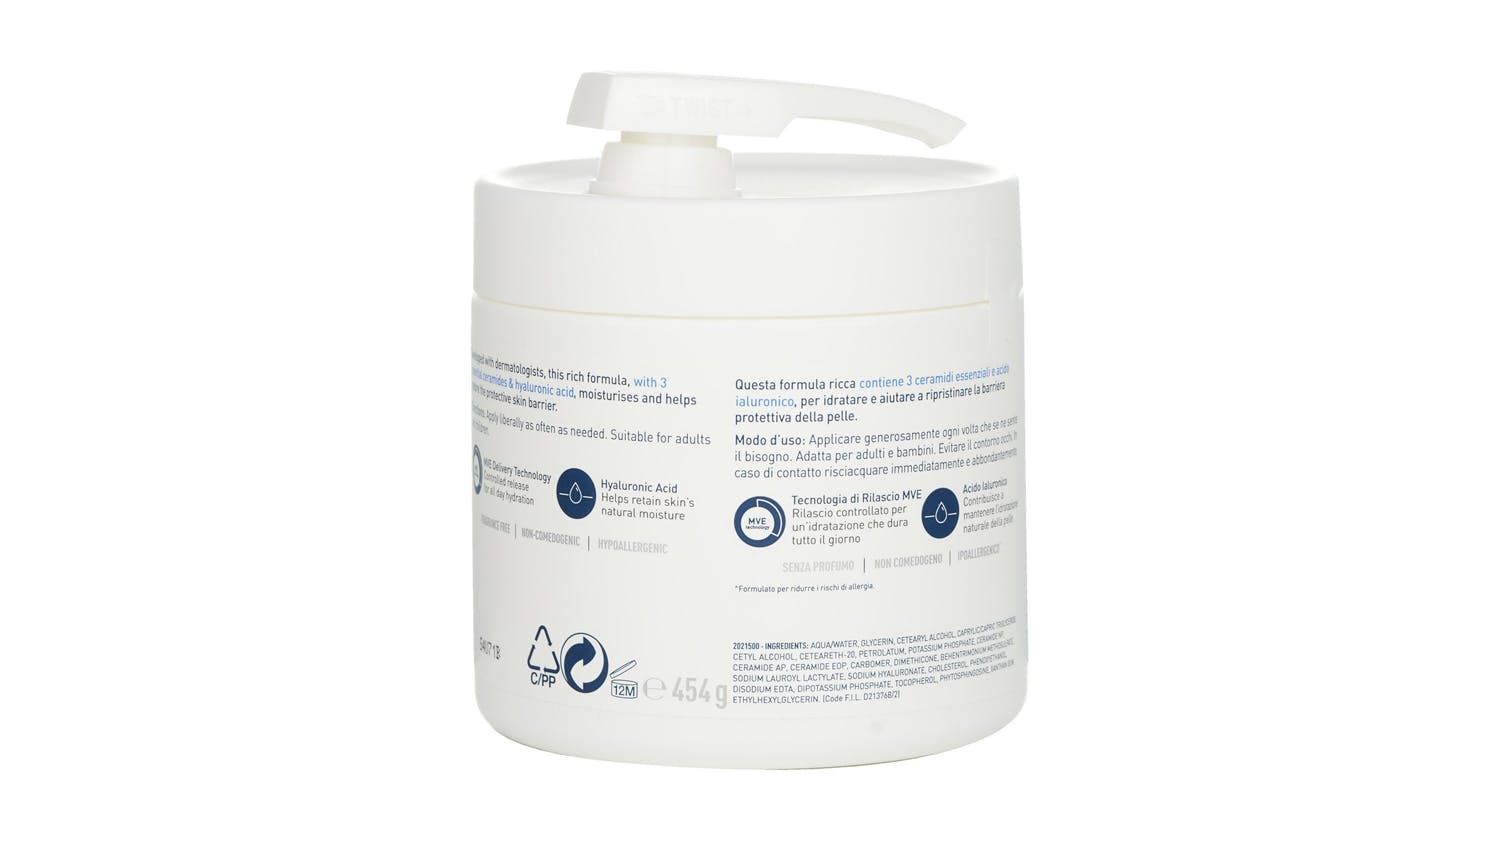 Moisturising Cream For Dry to Very Dry Skin (With Pump) - 454g/16oz